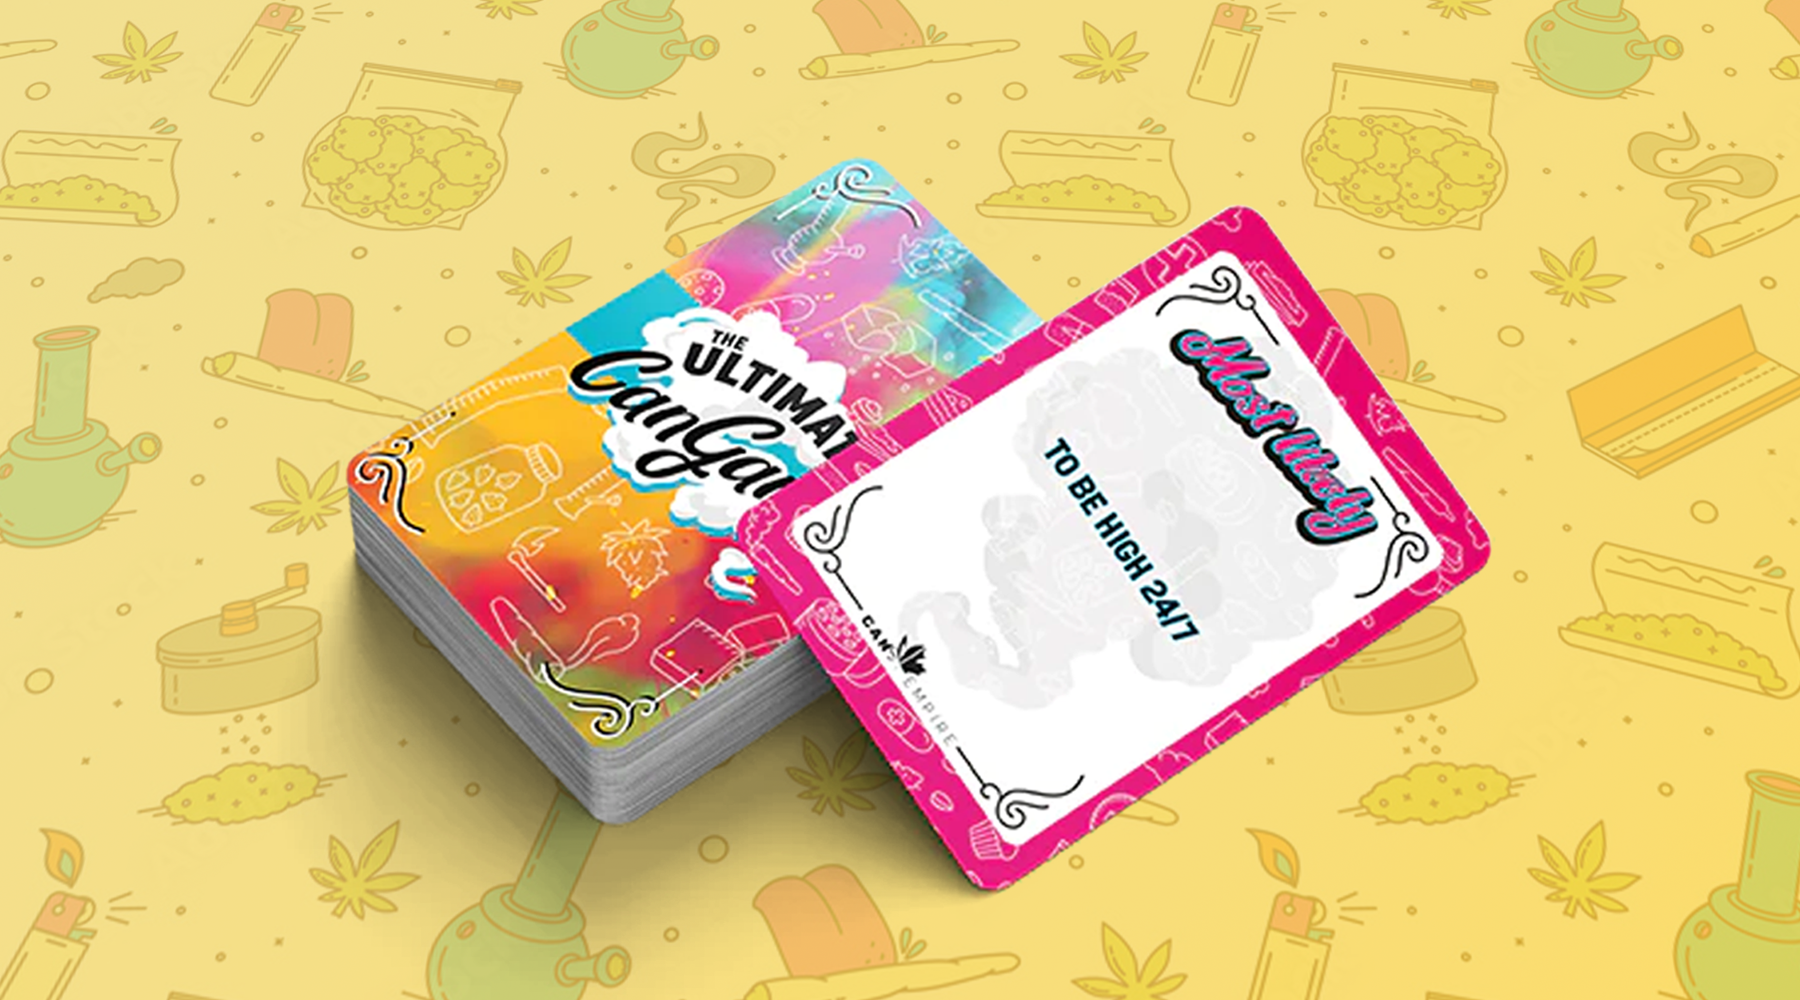 Introducing the Ultimate CanGame: Elevate Your Sesh with 420-Themed Party Fun!